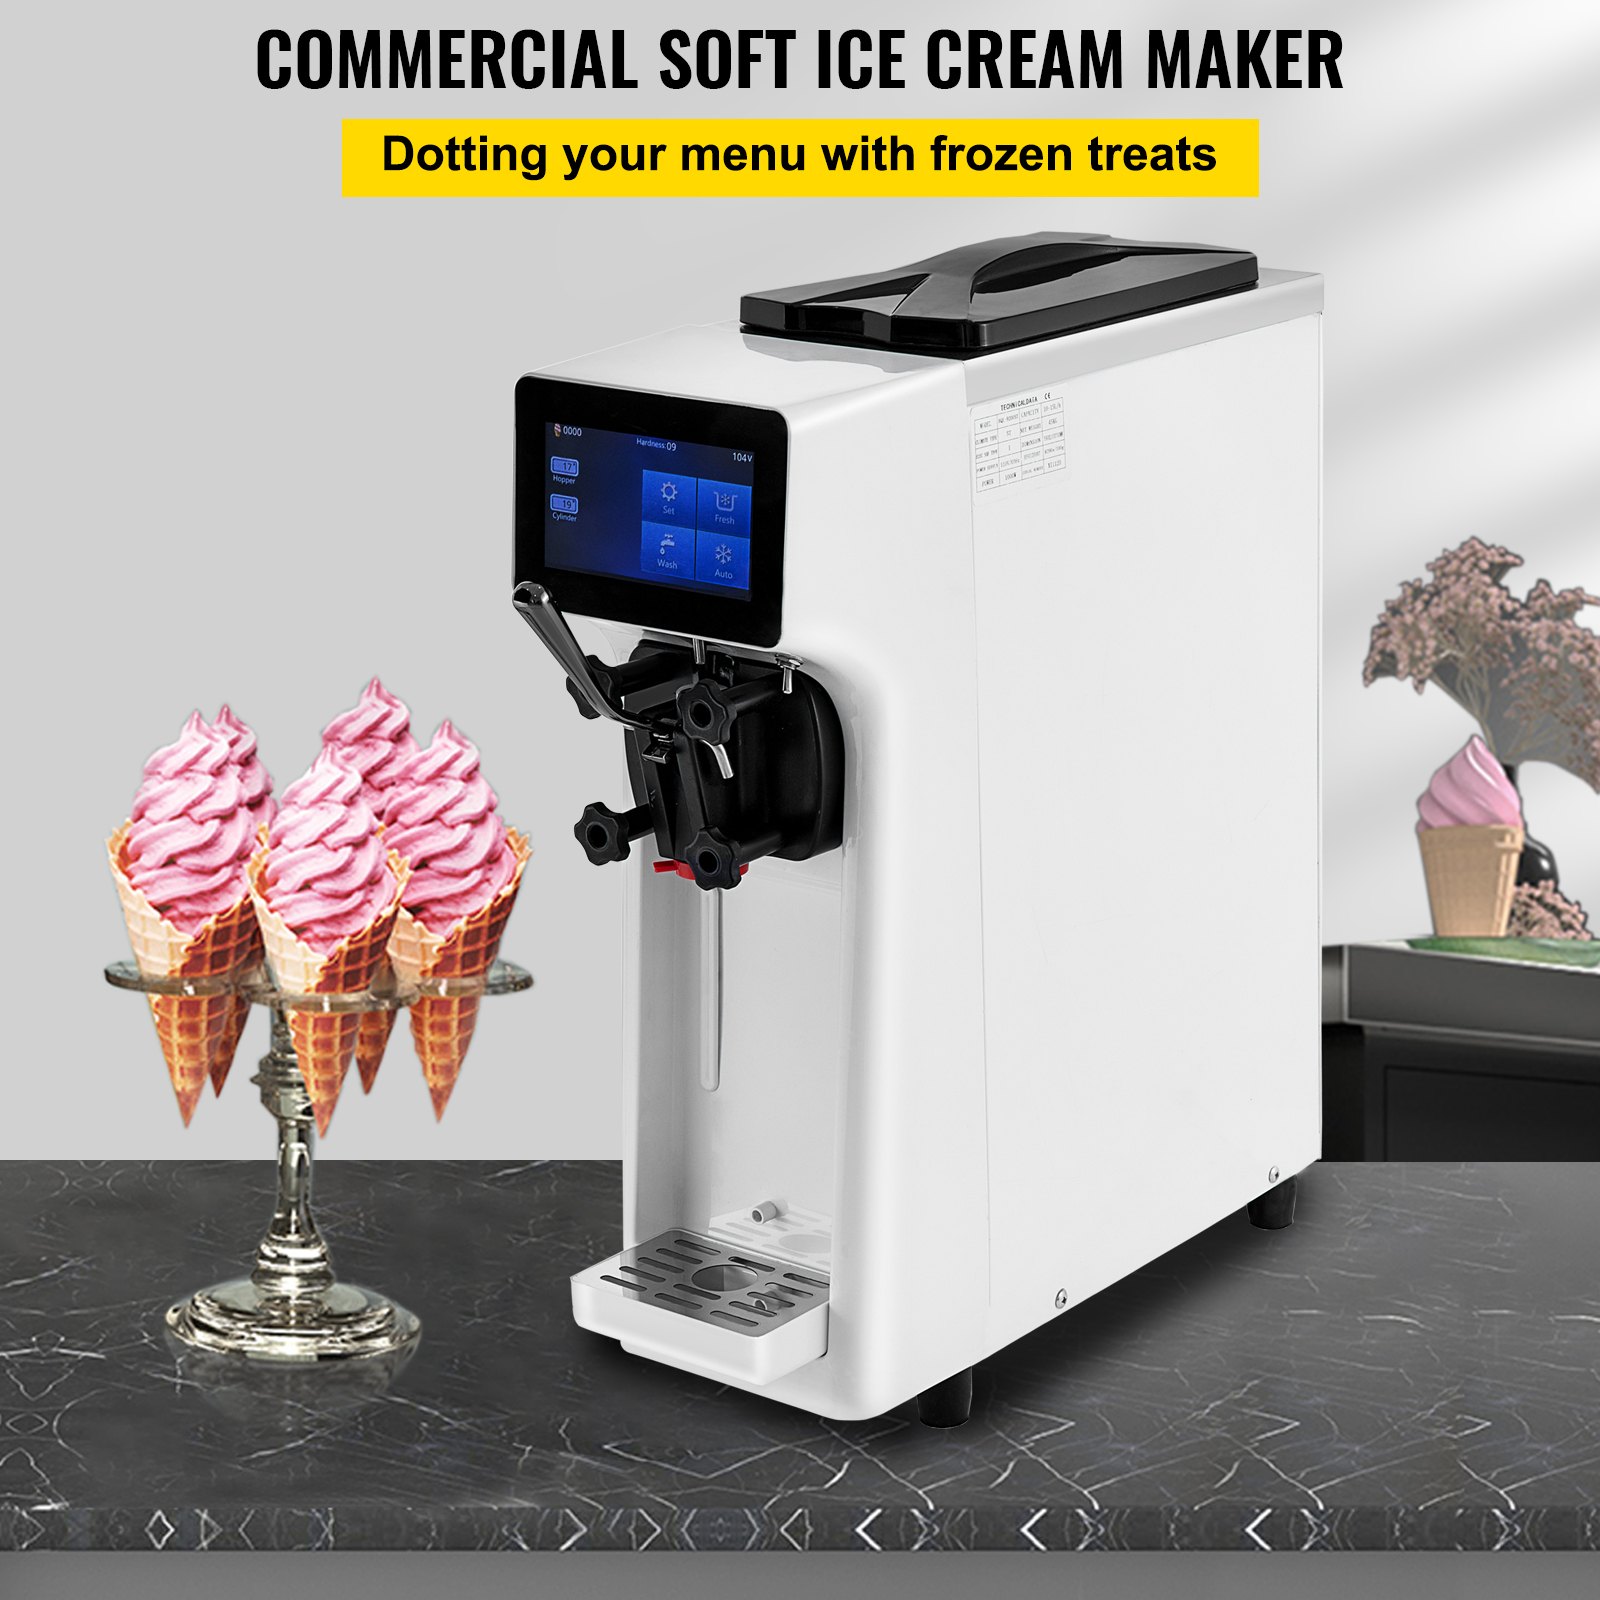 Vevor Commercial Ice Cream Maker 10 20lh Yield 1000w Countertop Soft Serve Machine With 45l 1496